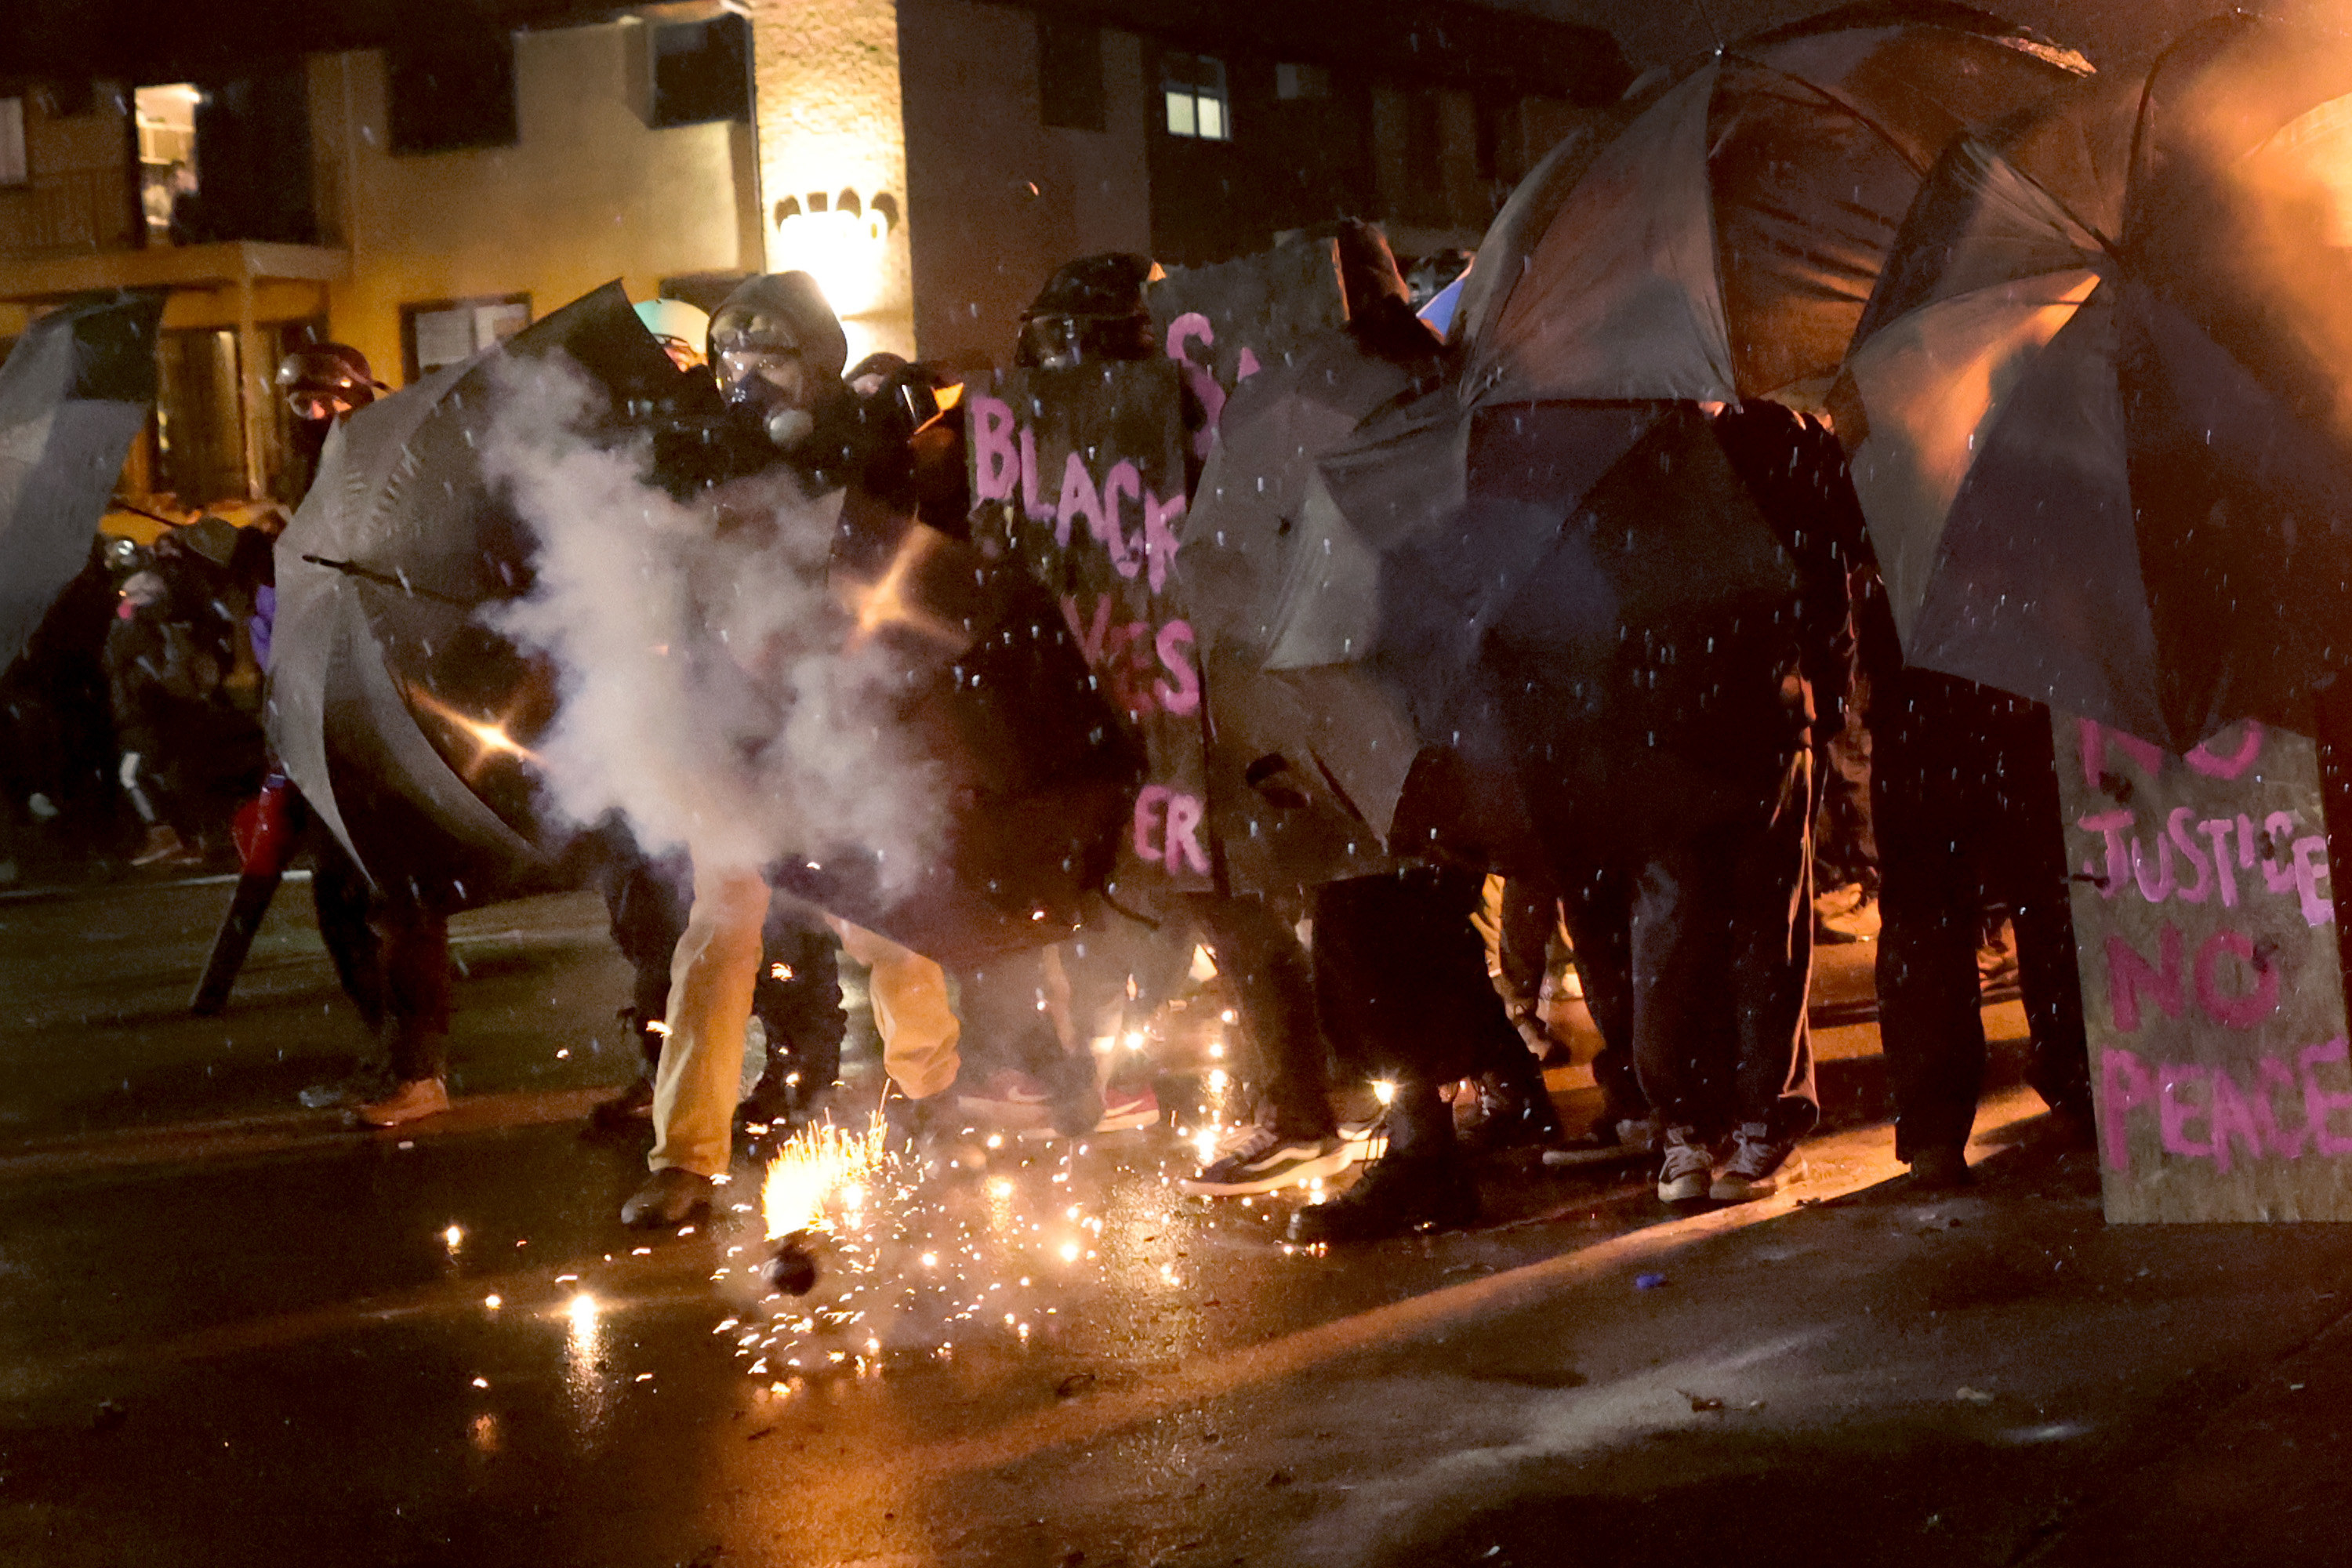 Protesters shield themselves with umbrellas as flash-bang grenades go off on the street at their feet